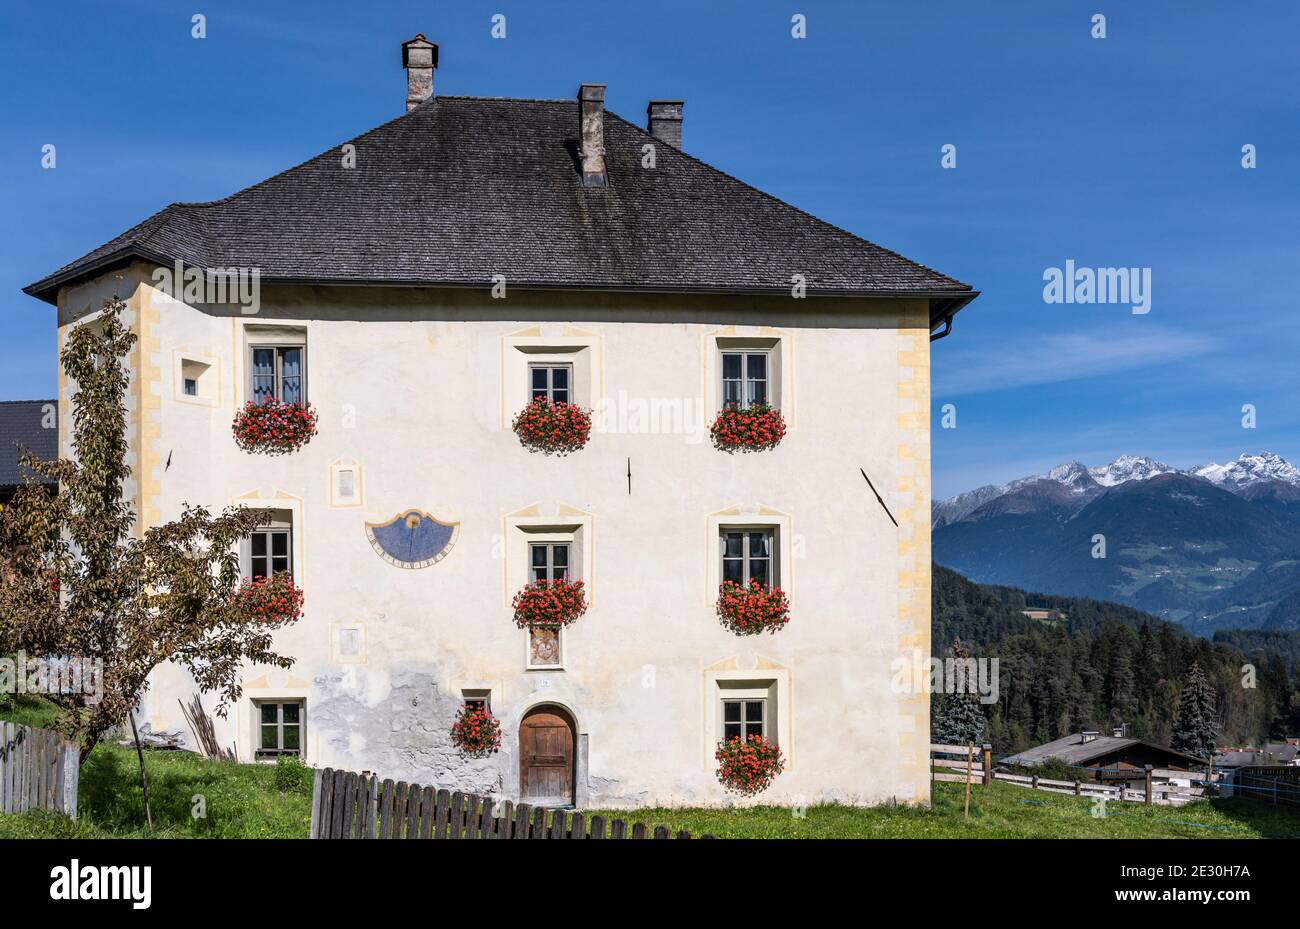 Farm and house with geraniums at the windows in Sankt Lorenzen Dolomites, Italy. Stock Photo